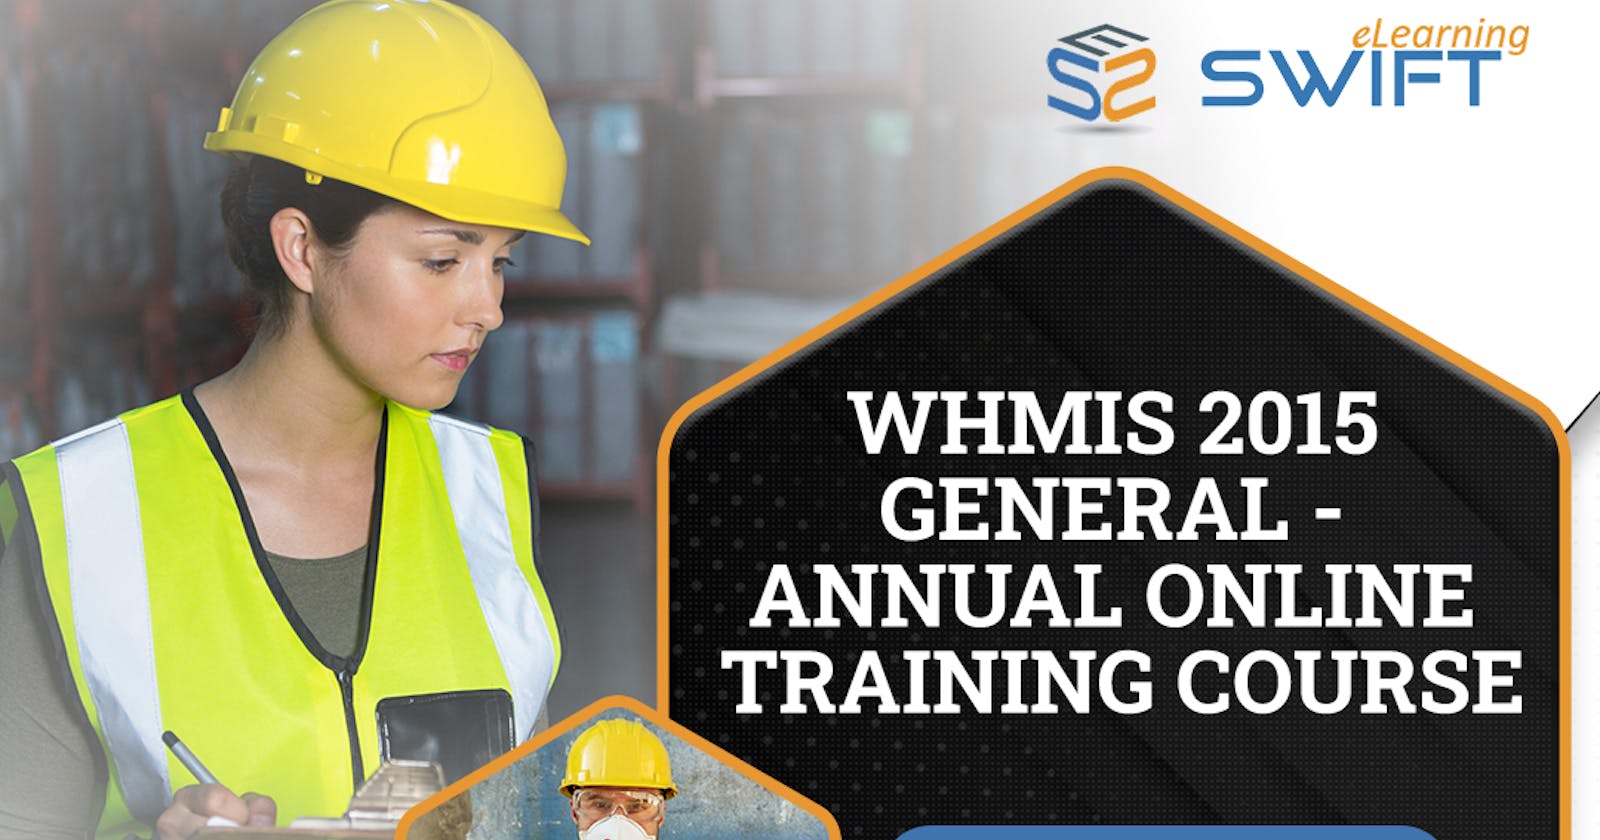 WHMIS Online Training Course and Certification